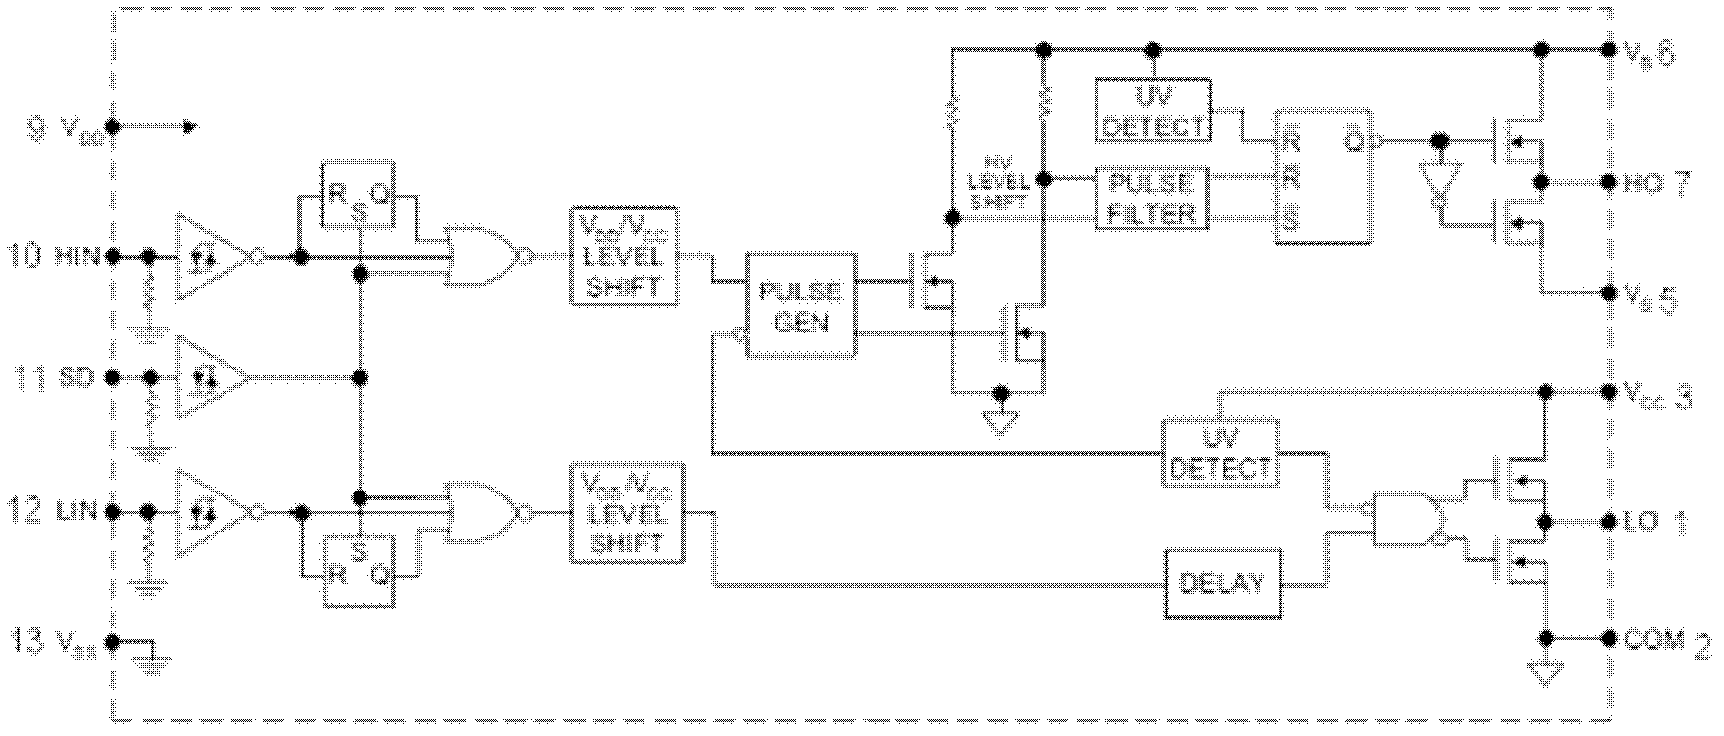 Switch tube driving circuit based on integrated driving chip